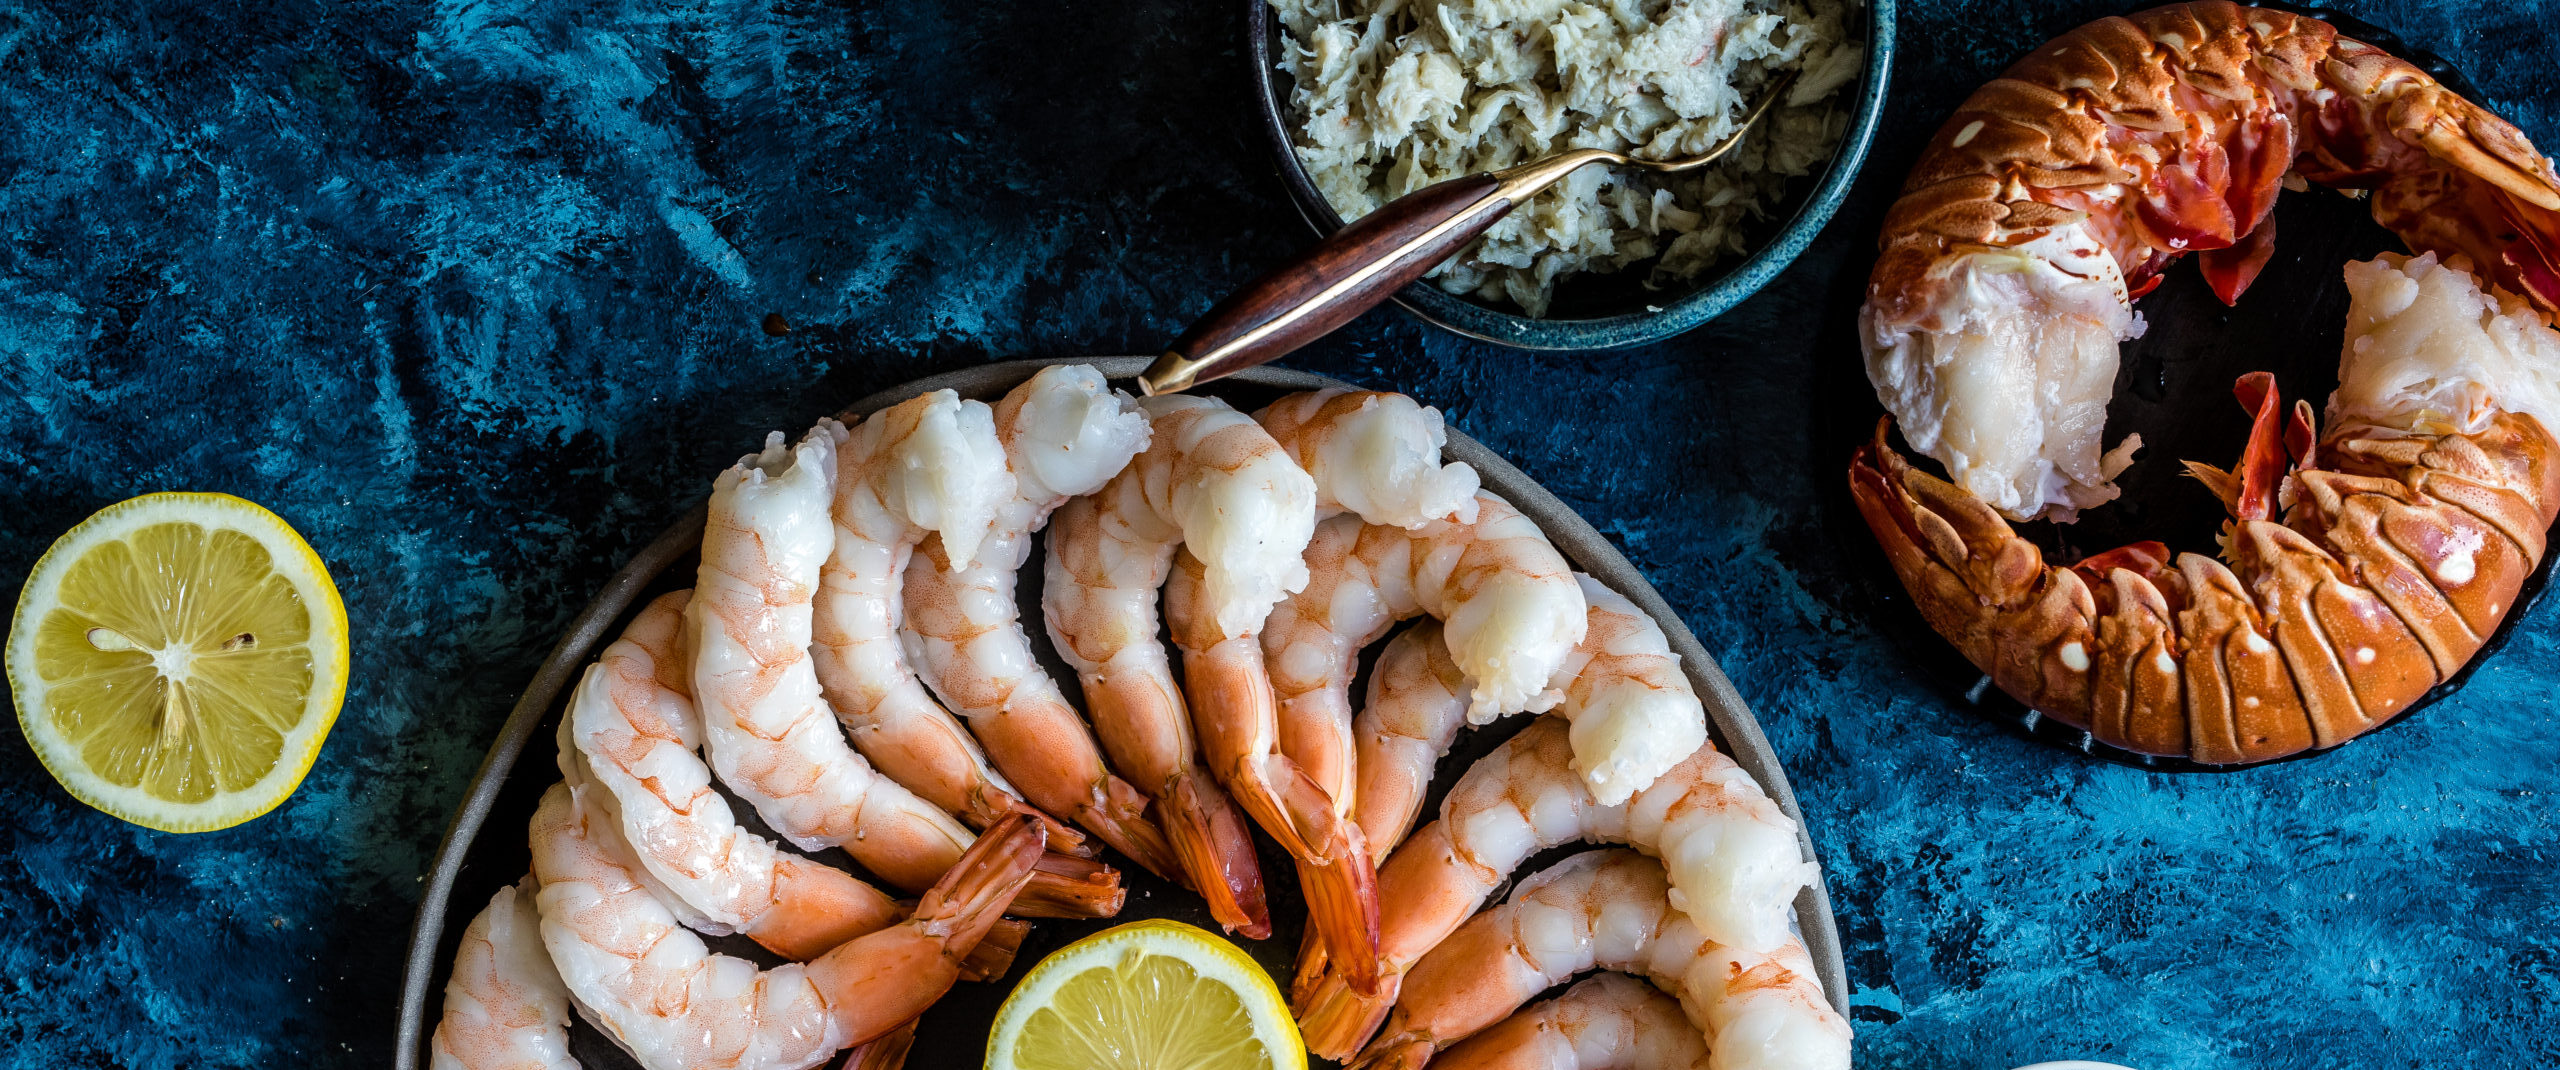 shrimp platter and lobster tails with lemon and cocktail sauce